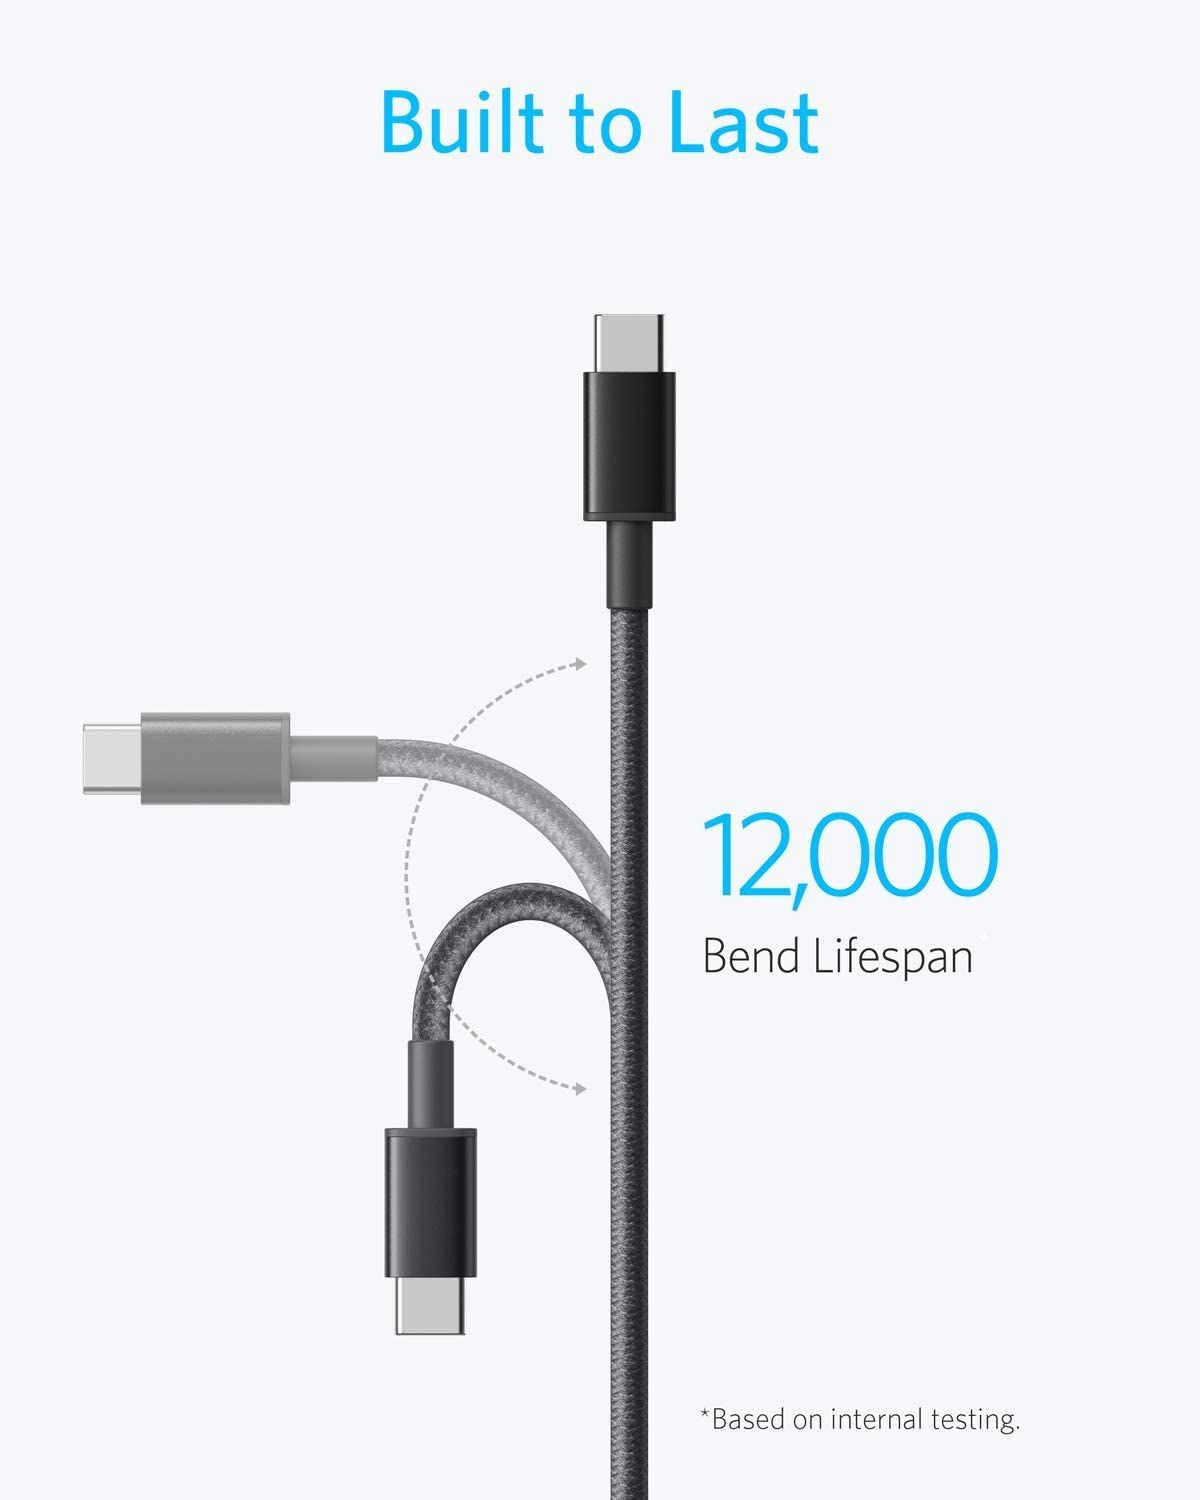 Anker New Nylon USB C to USB C Cable durability